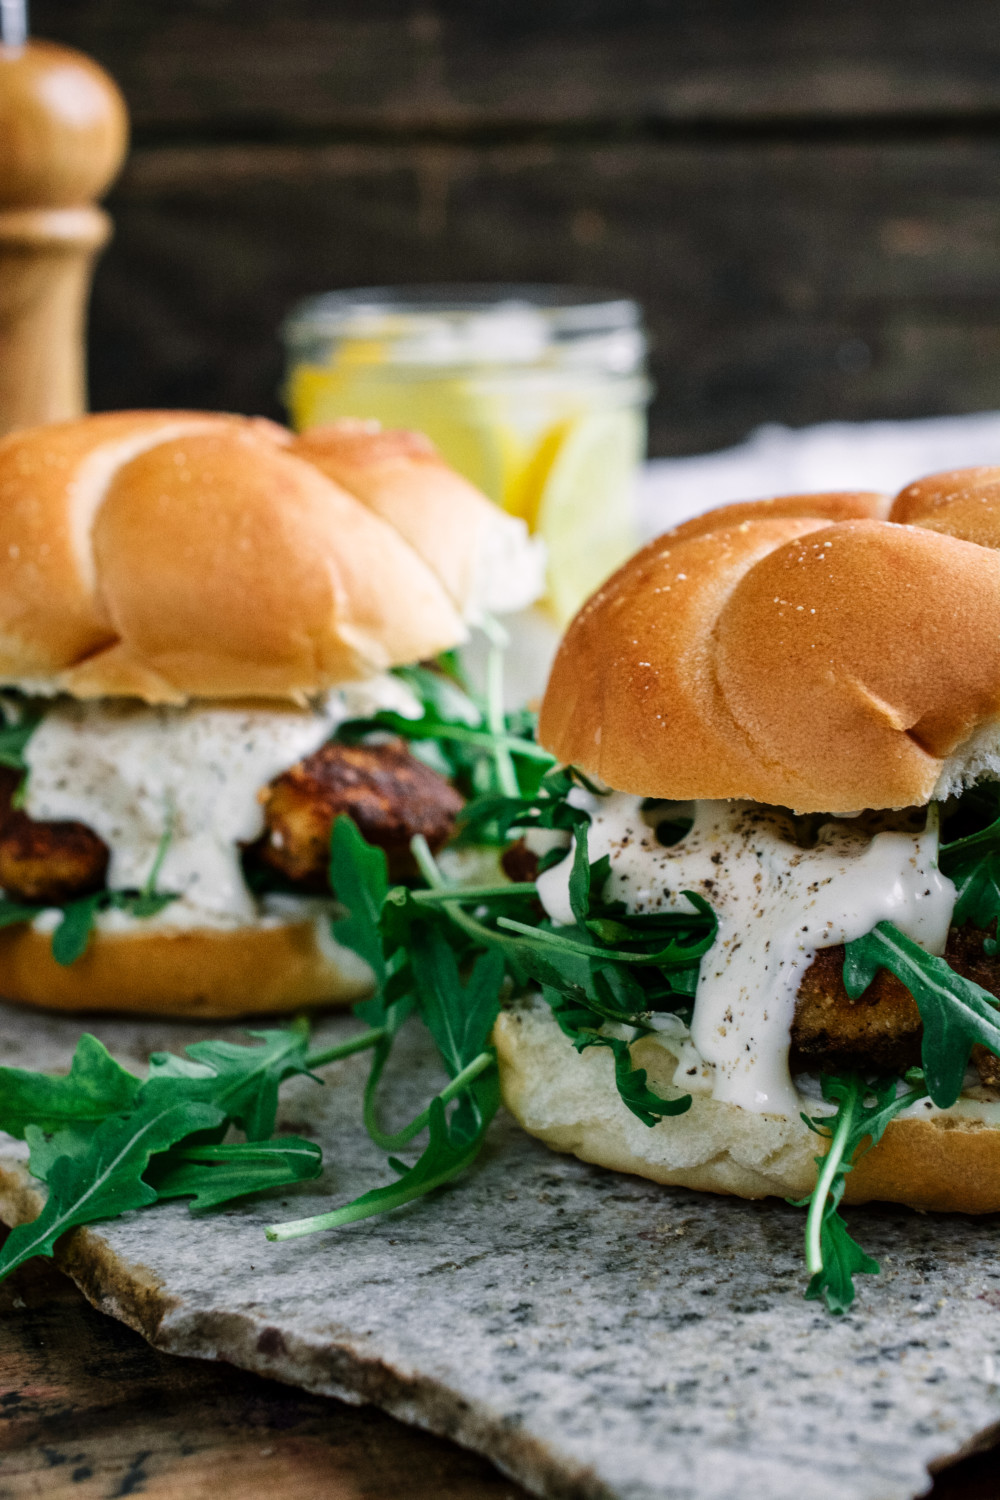 This Chicken Cutlet with Lemon Mayonnaise and Arugula Sandwich is the ultimate in flavor and crunch! ciaochowbambina.com #chickencutlet #chickensandwich #cutletsandwich #italianfood #ciaochowbambina